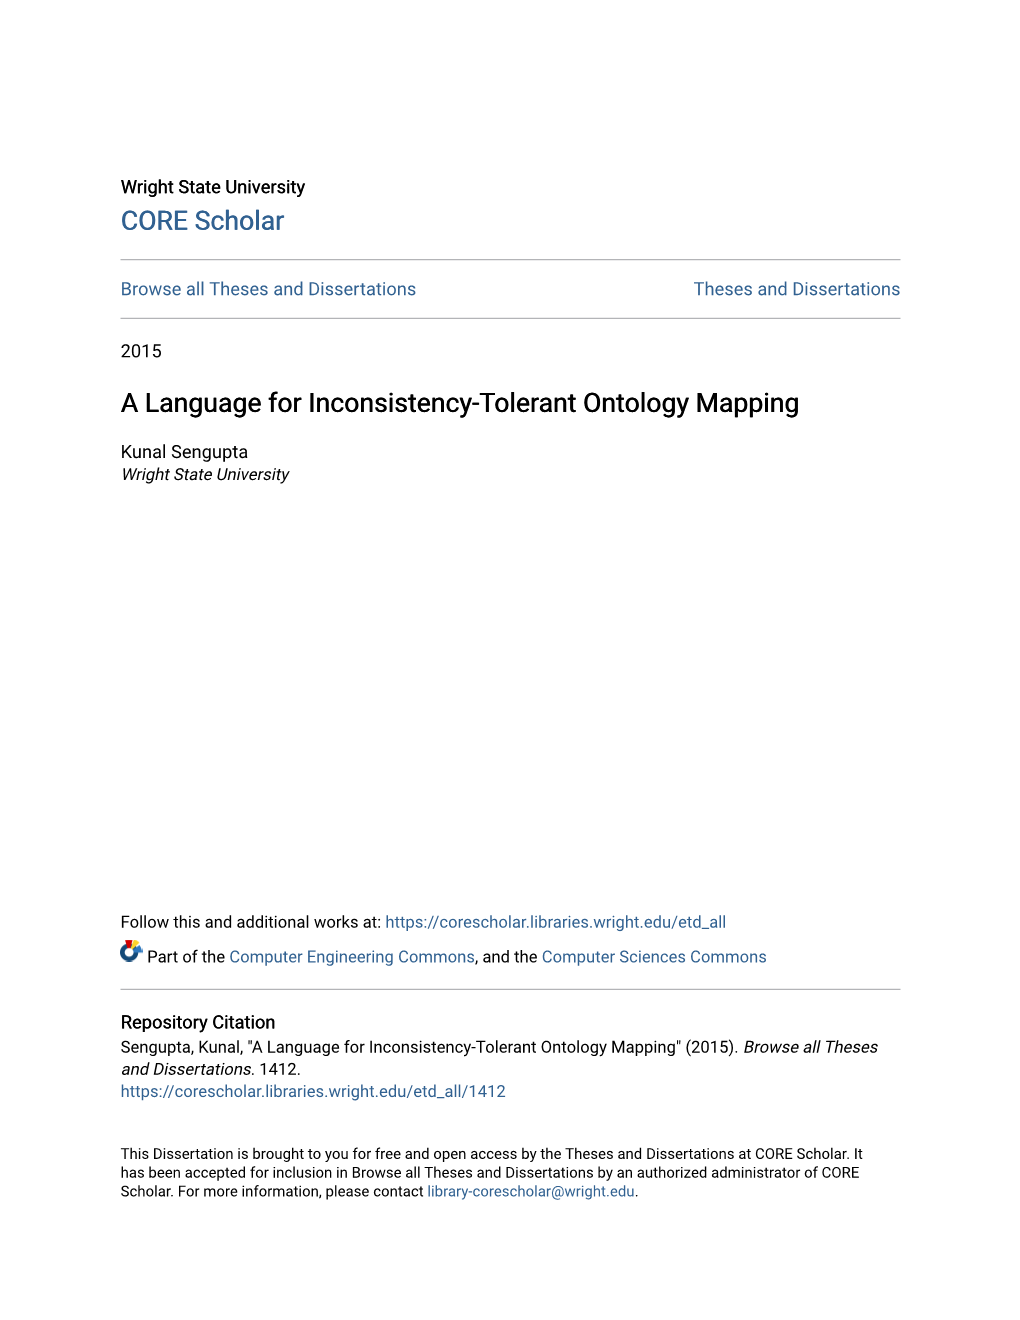 A Language for Inconsistency-Tolerant Ontology Mapping